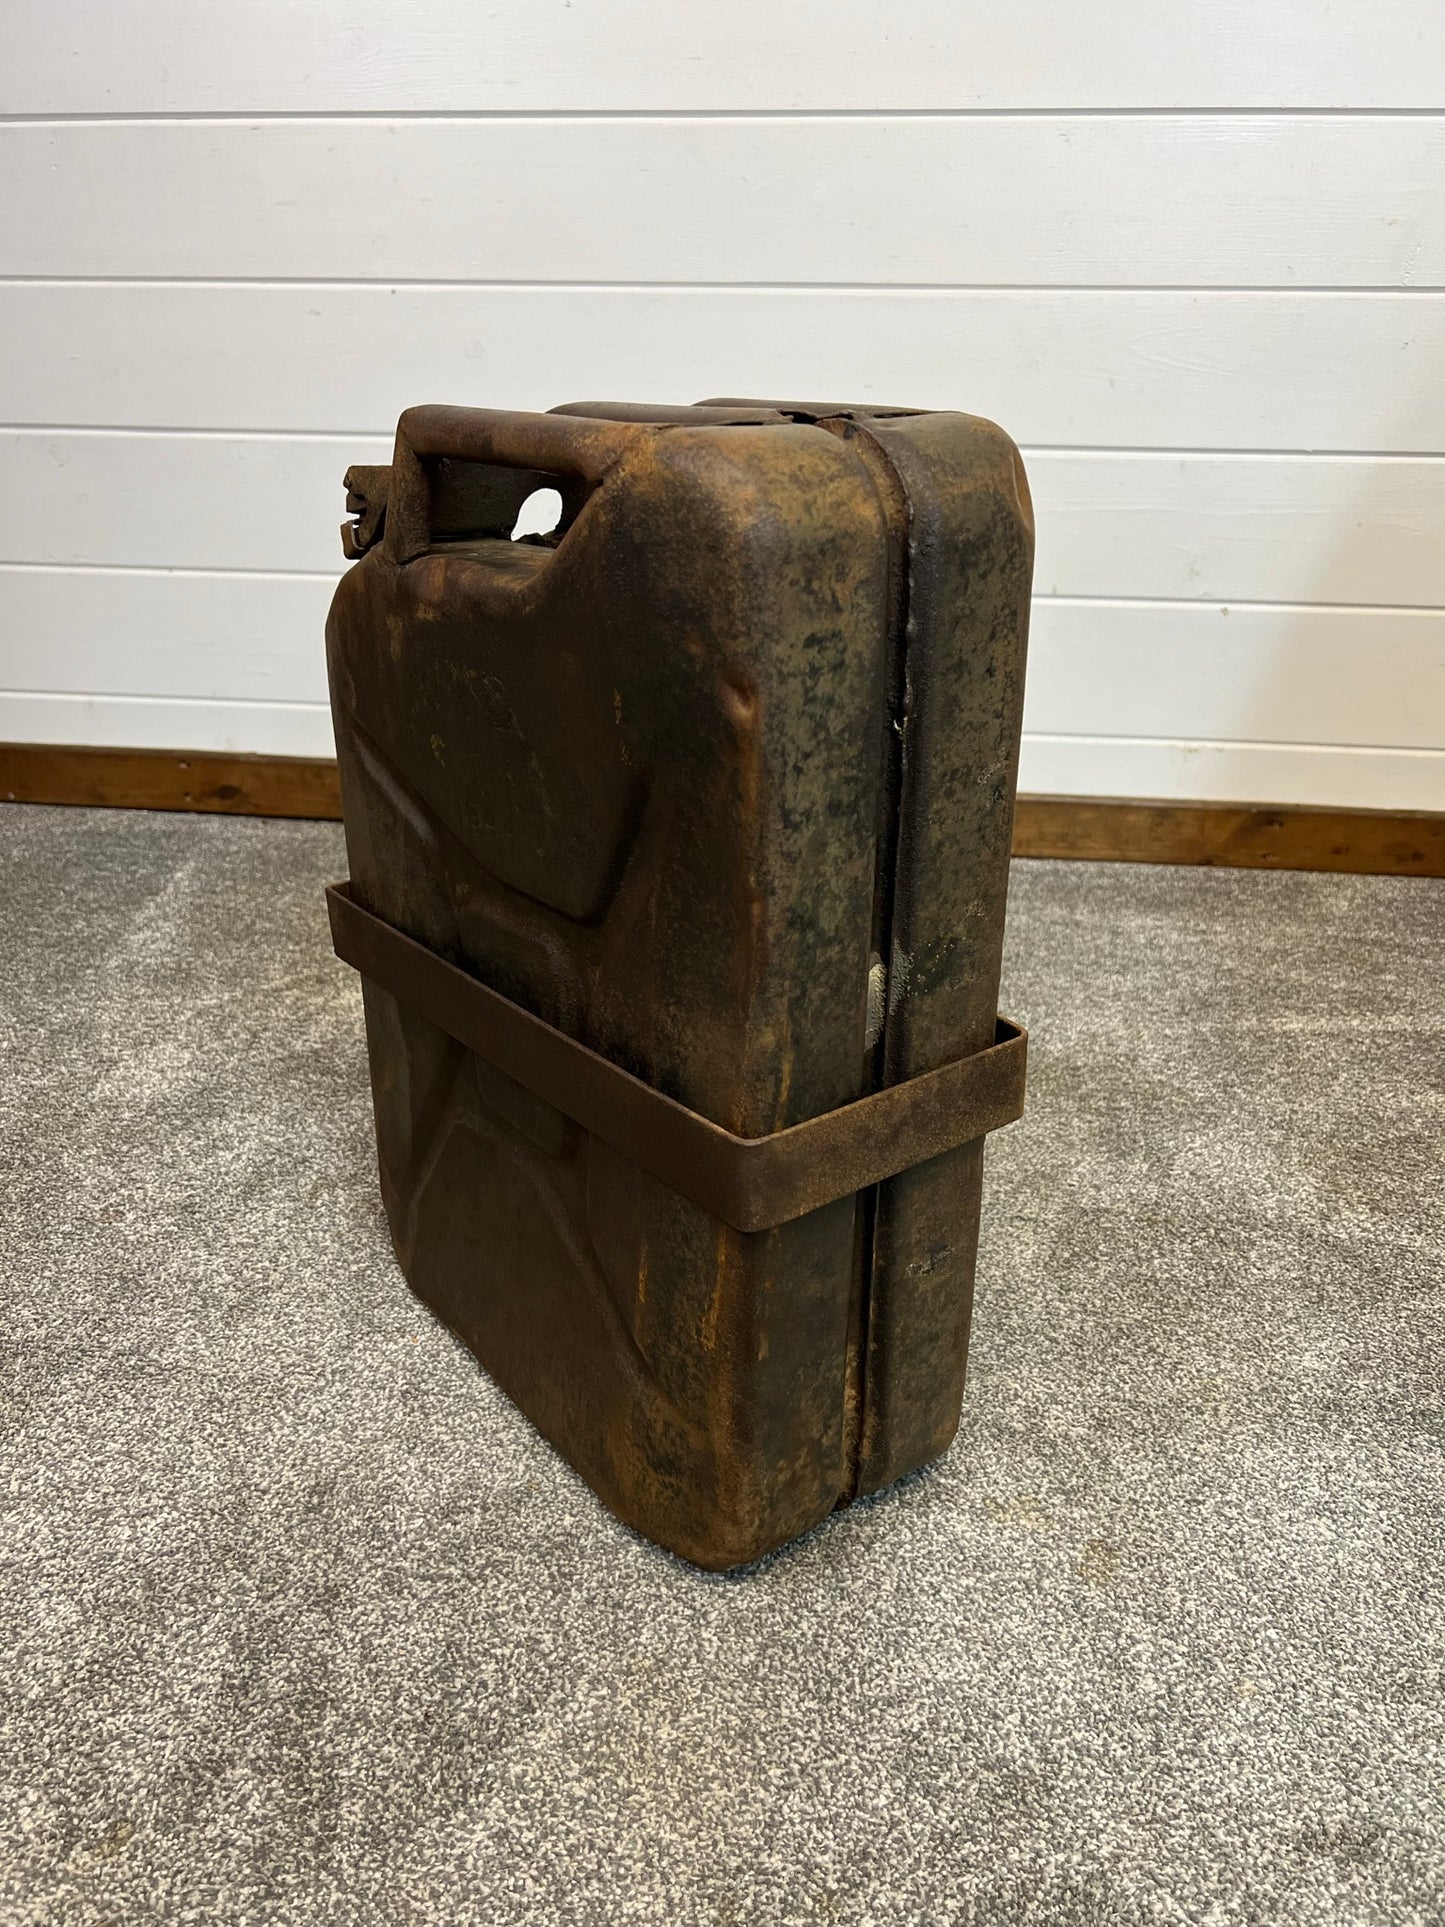 Vintage Army WW2 War Dated Jerry Can WD 1944 Military Jeep Display